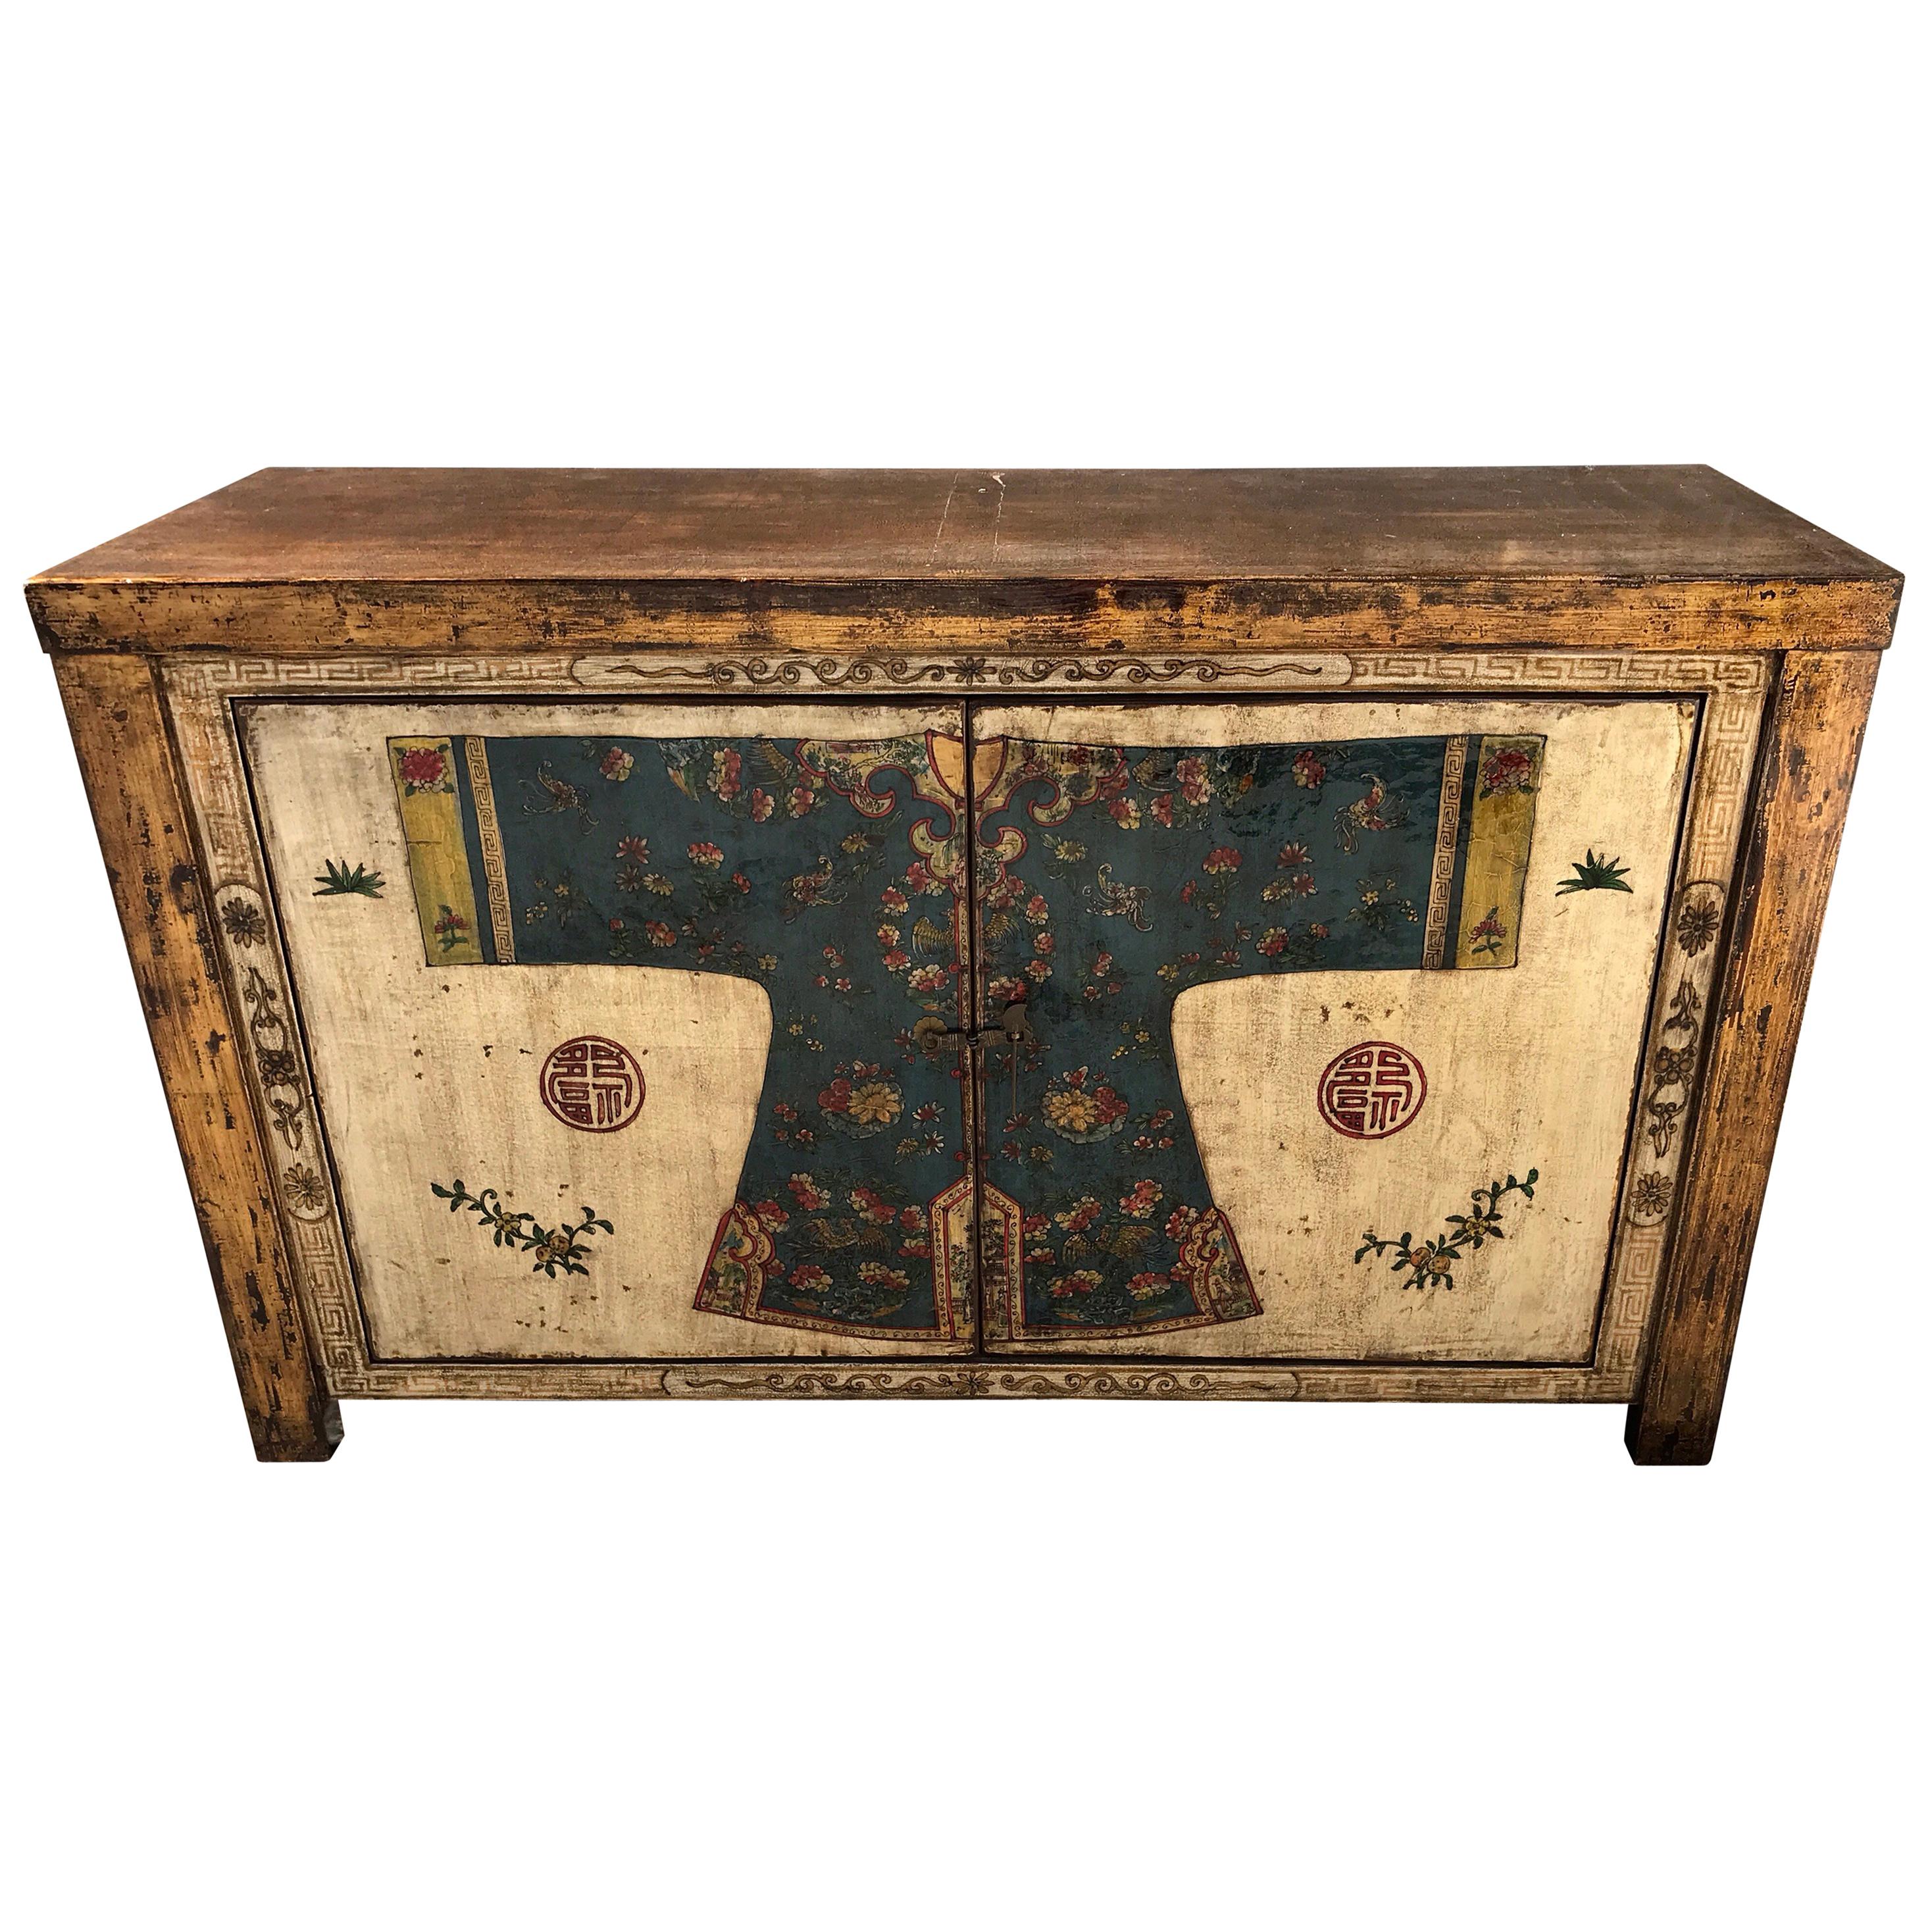 Chinese Robe Motif Lacquered Cabinet